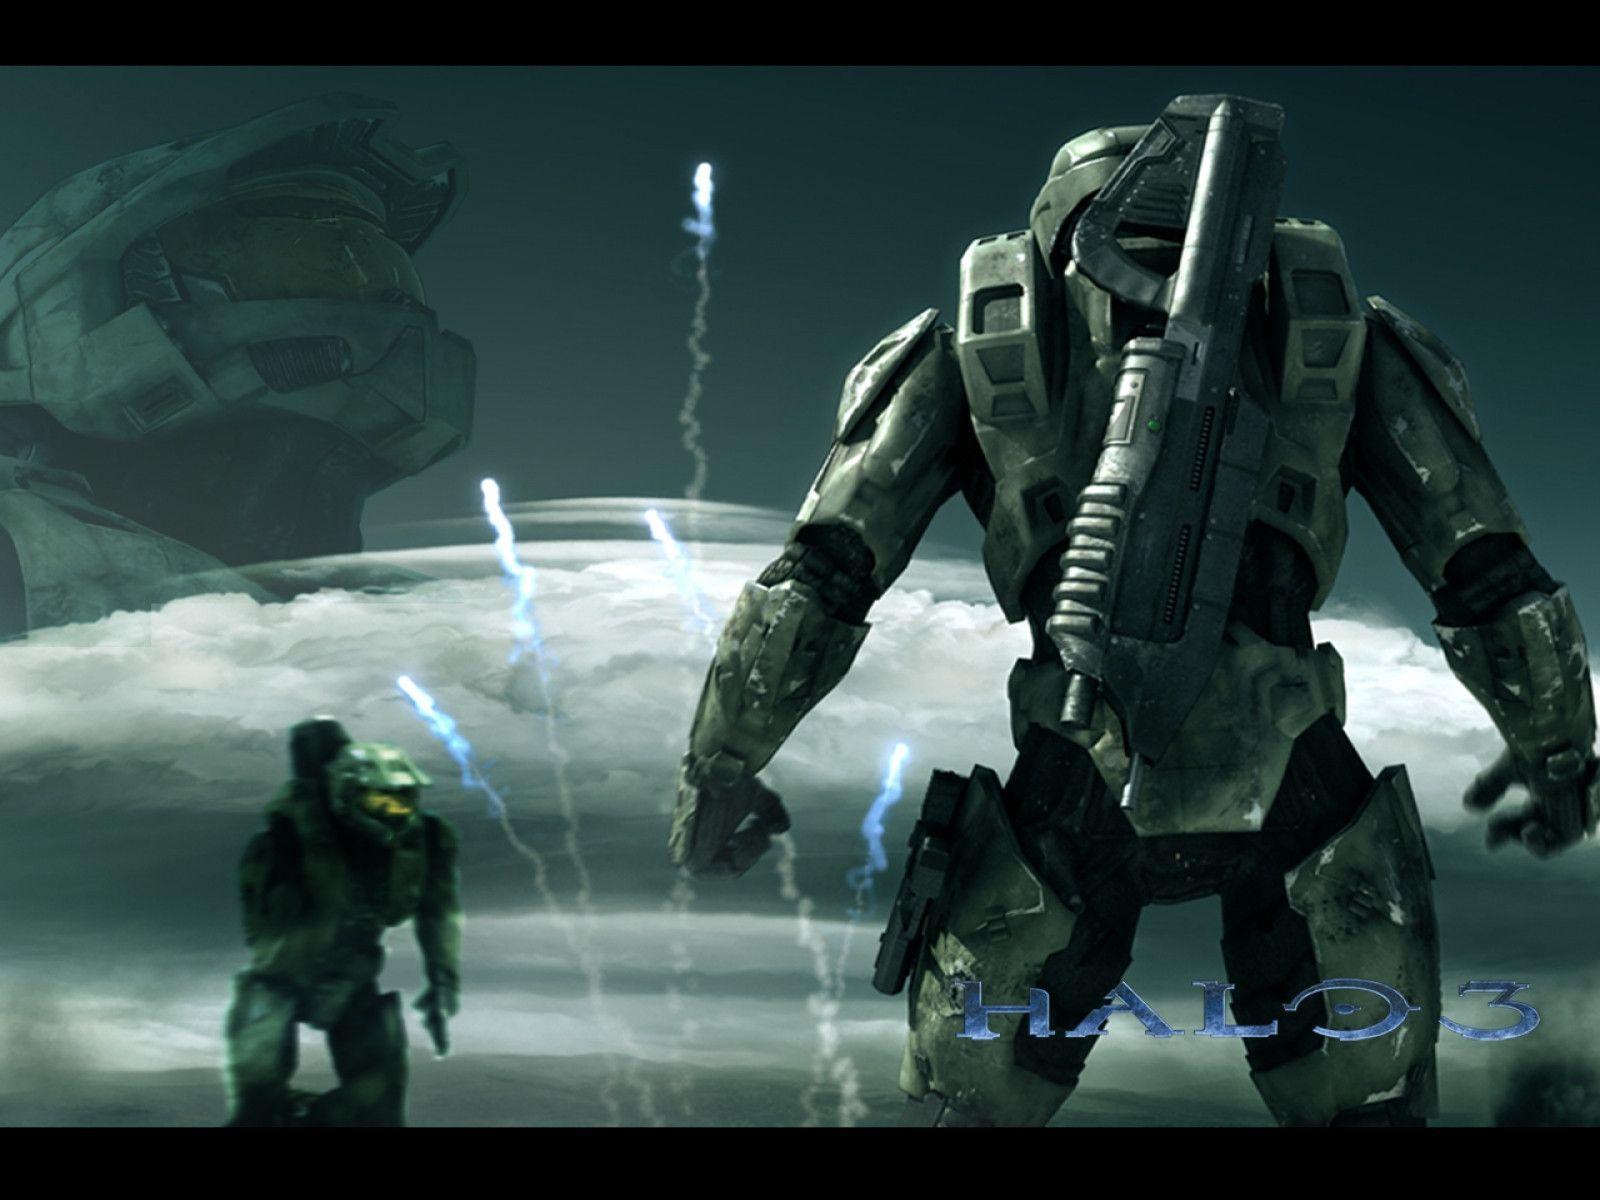 image For > Halo 3 Master Chief Wallpaper